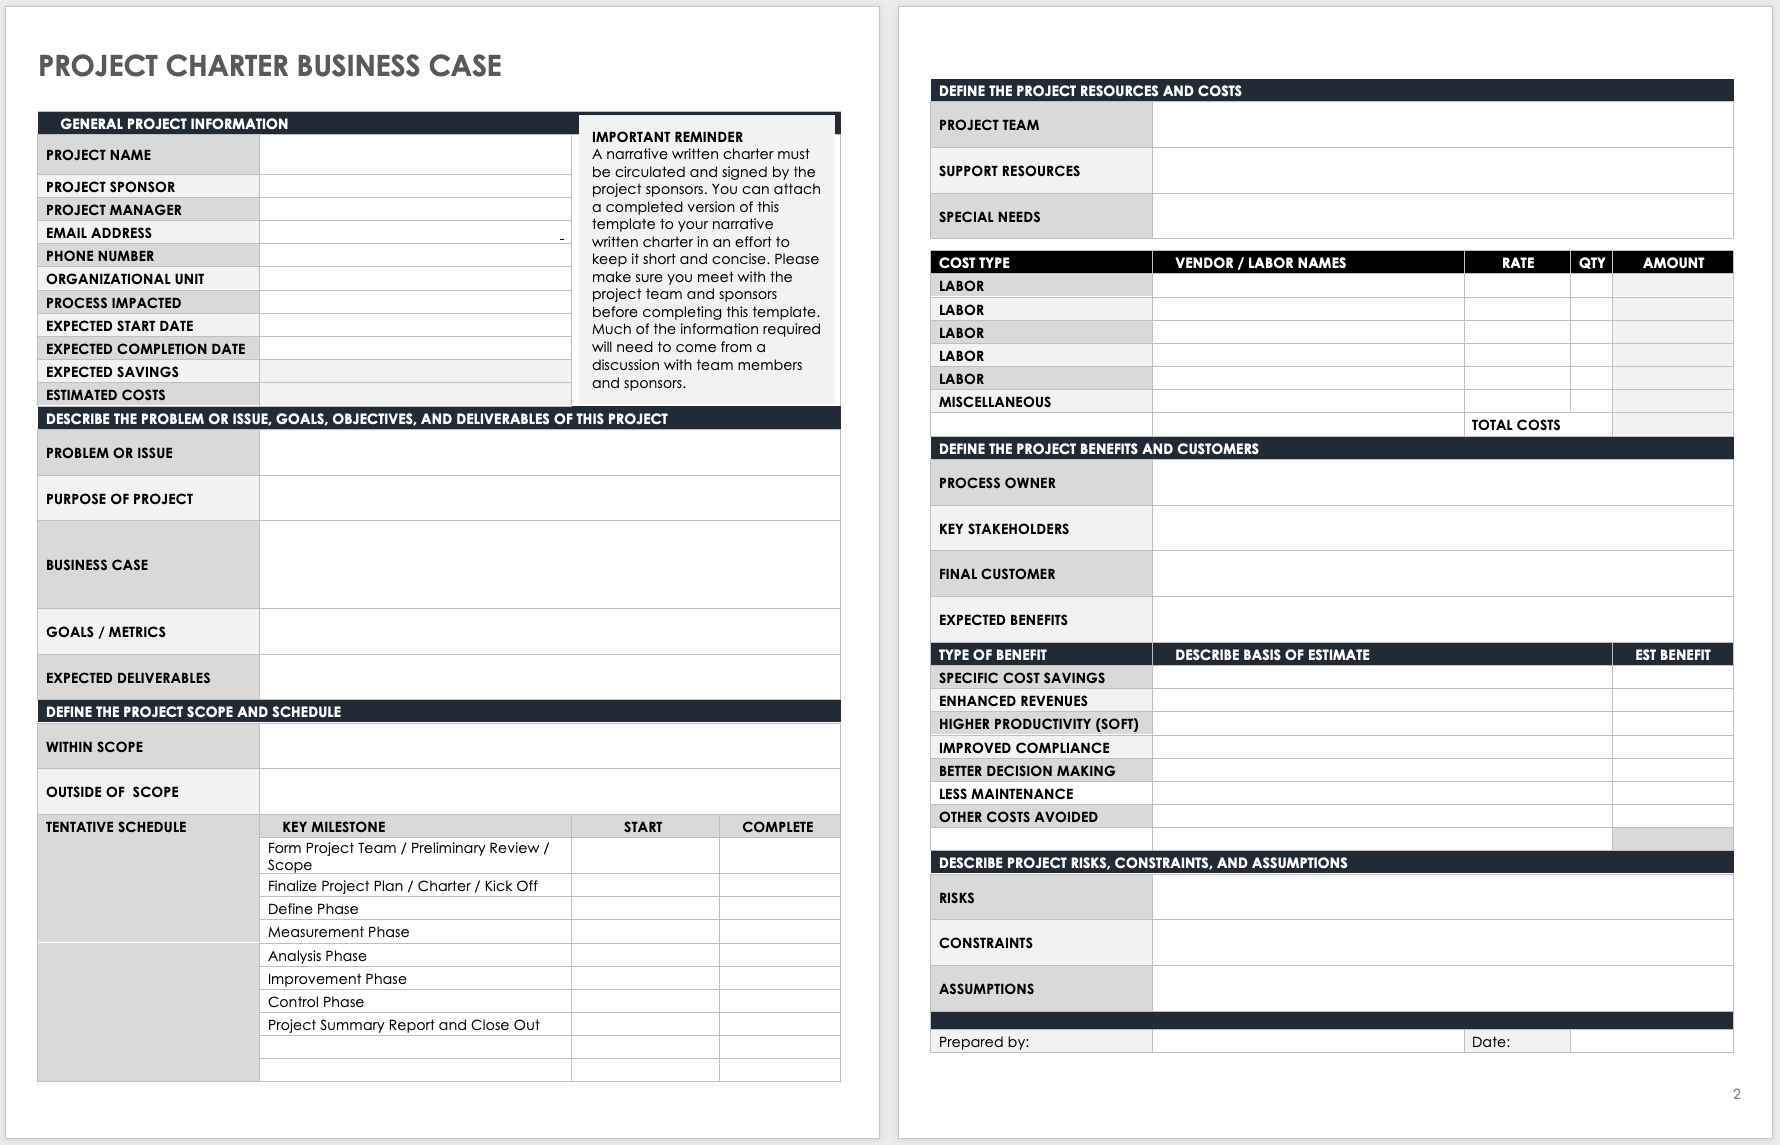 Project Charter Business Case Template Updated